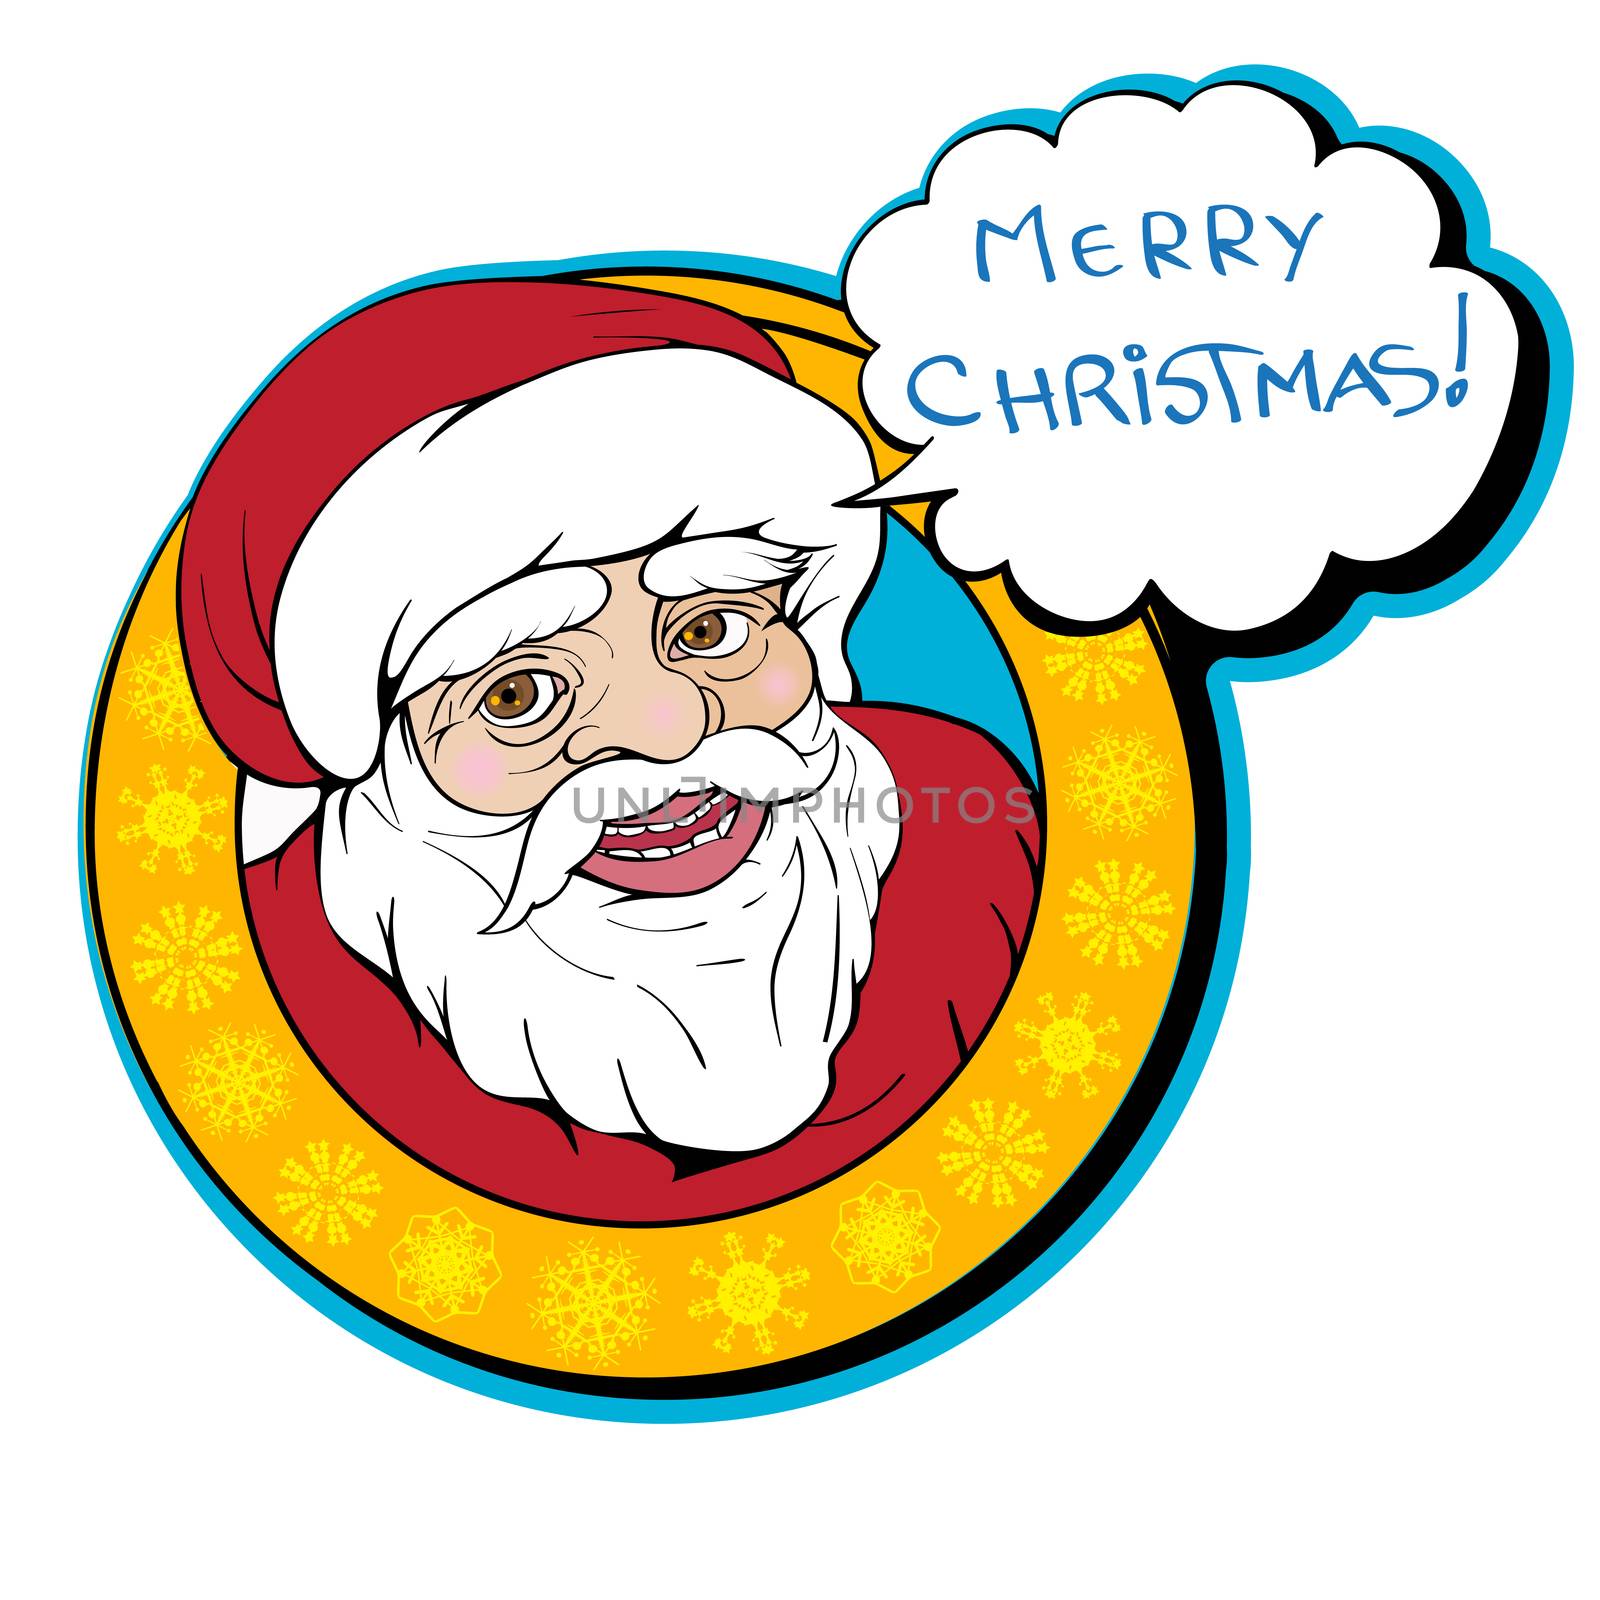 Santa Claus hand drawn illustration isolated on white, clip art with message in speech bubble for Christmas